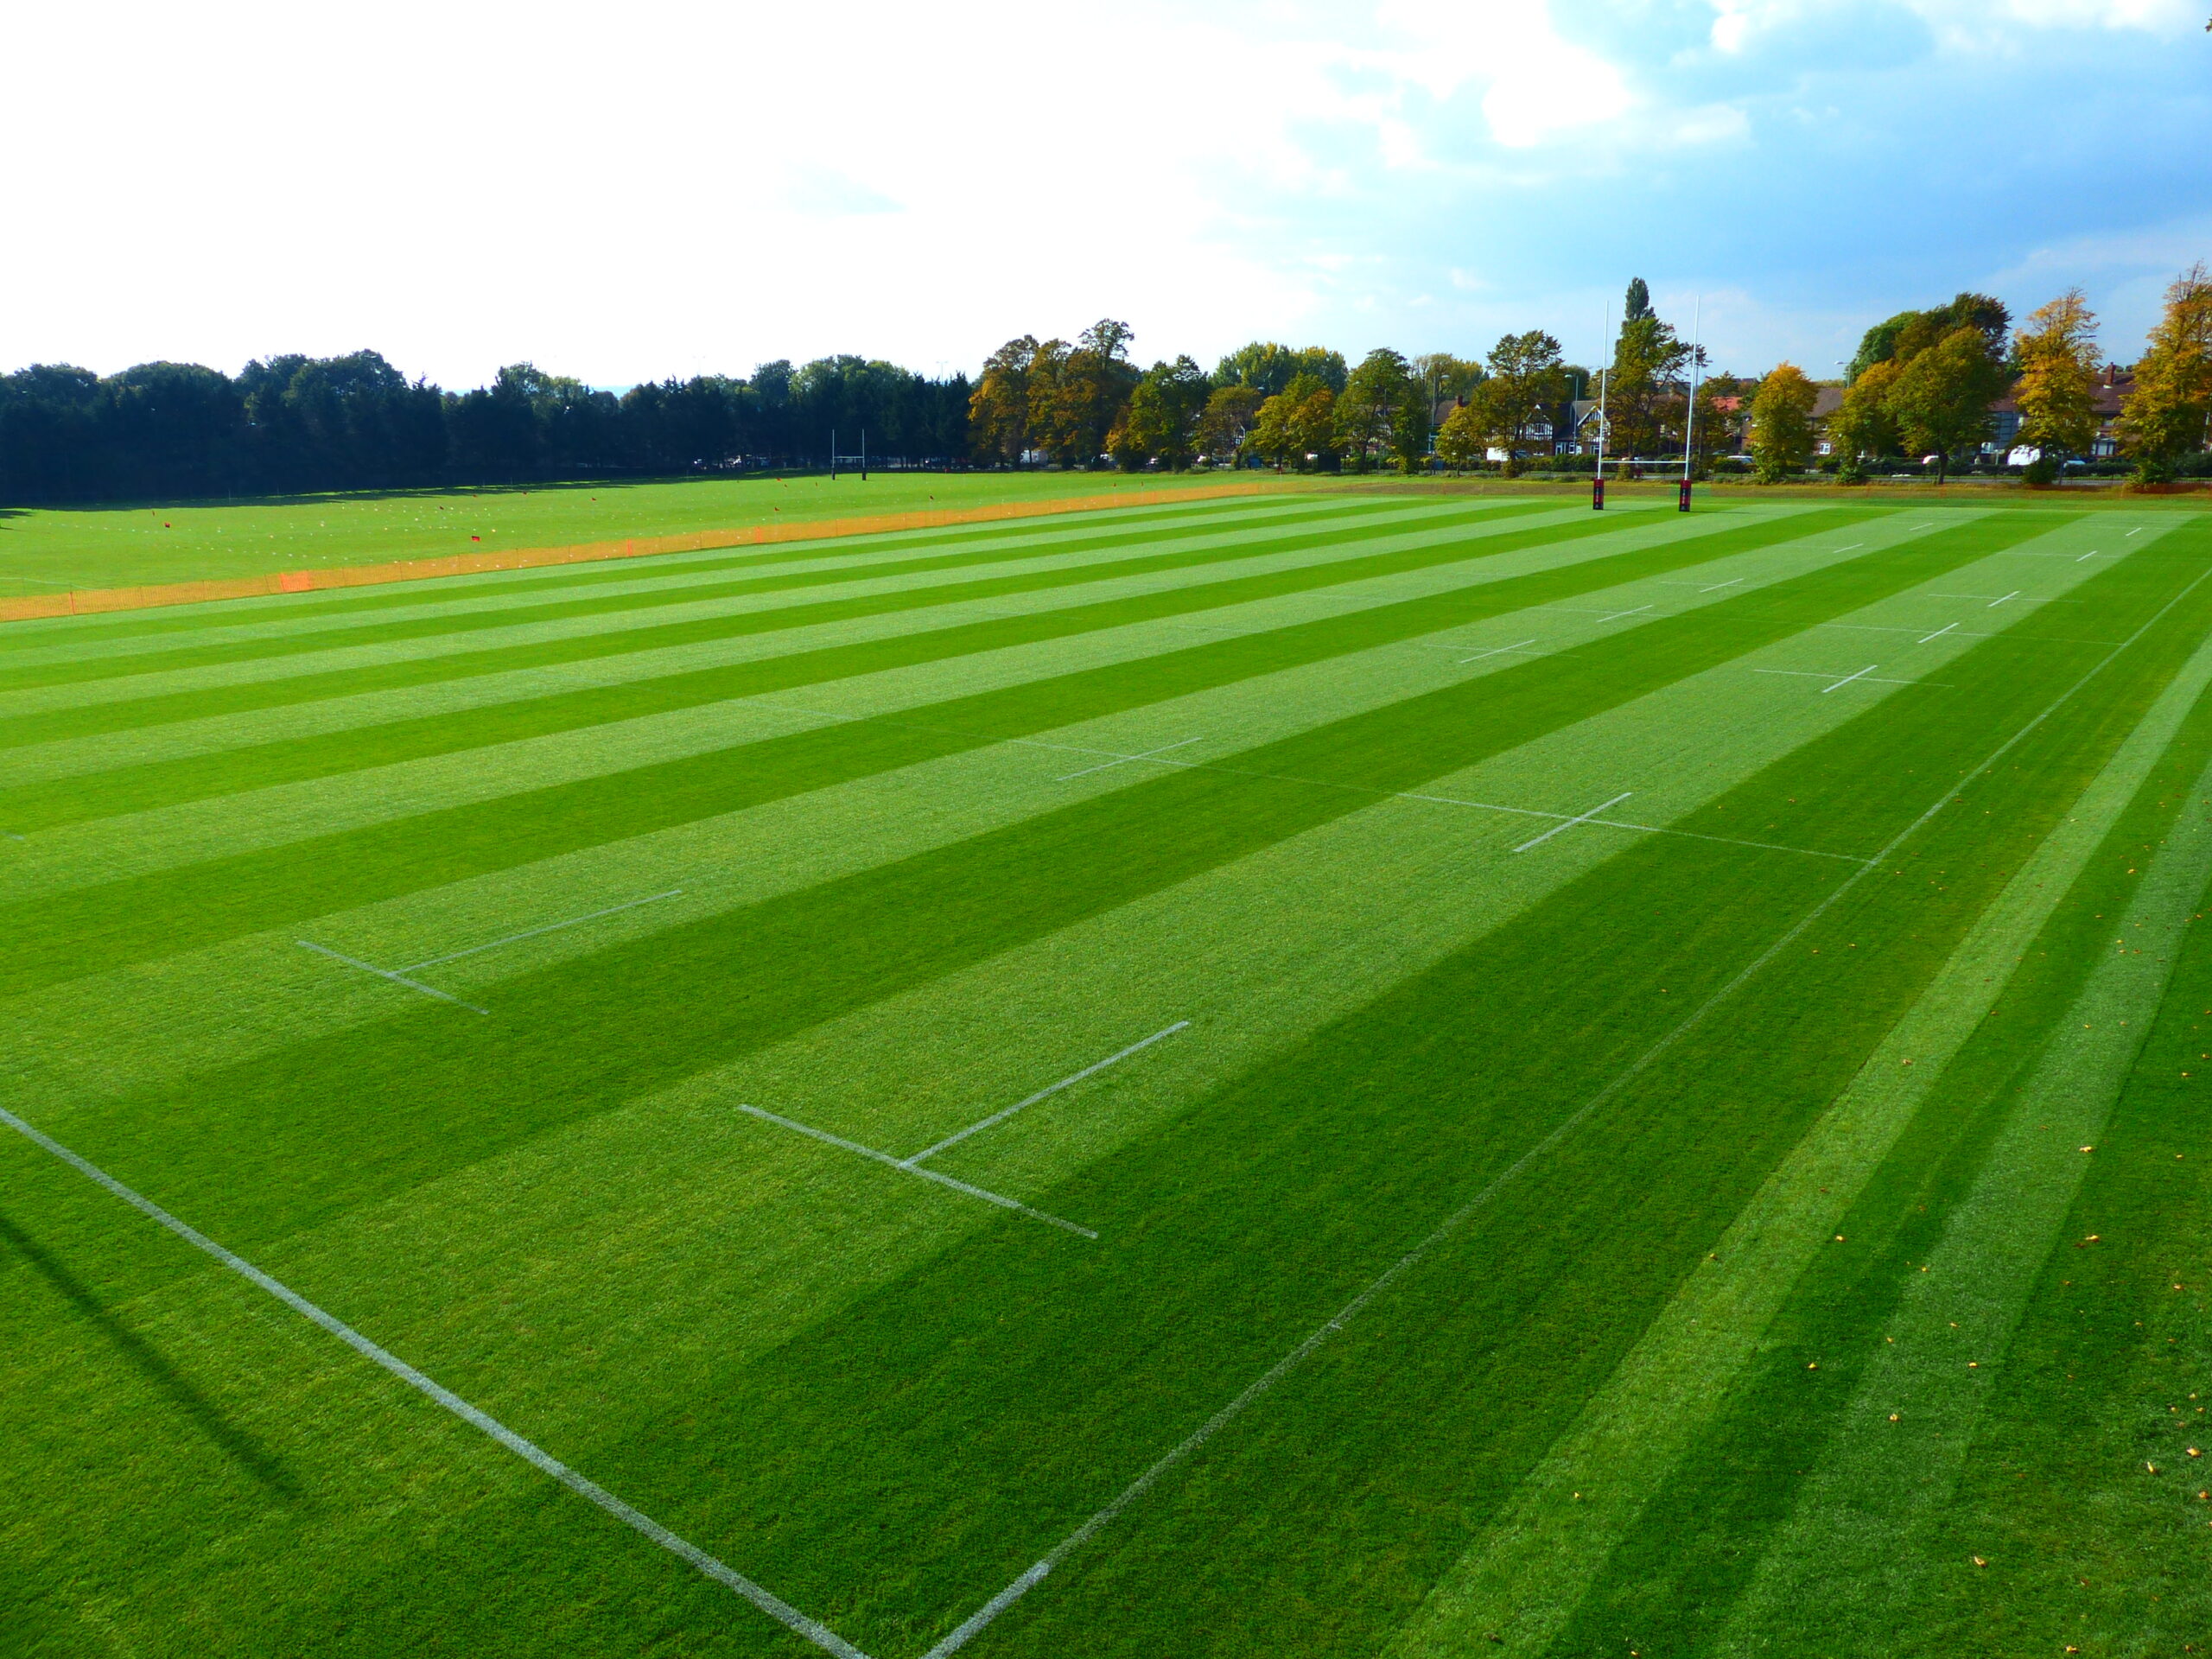 For a pitch like this, get started with your Spring clean